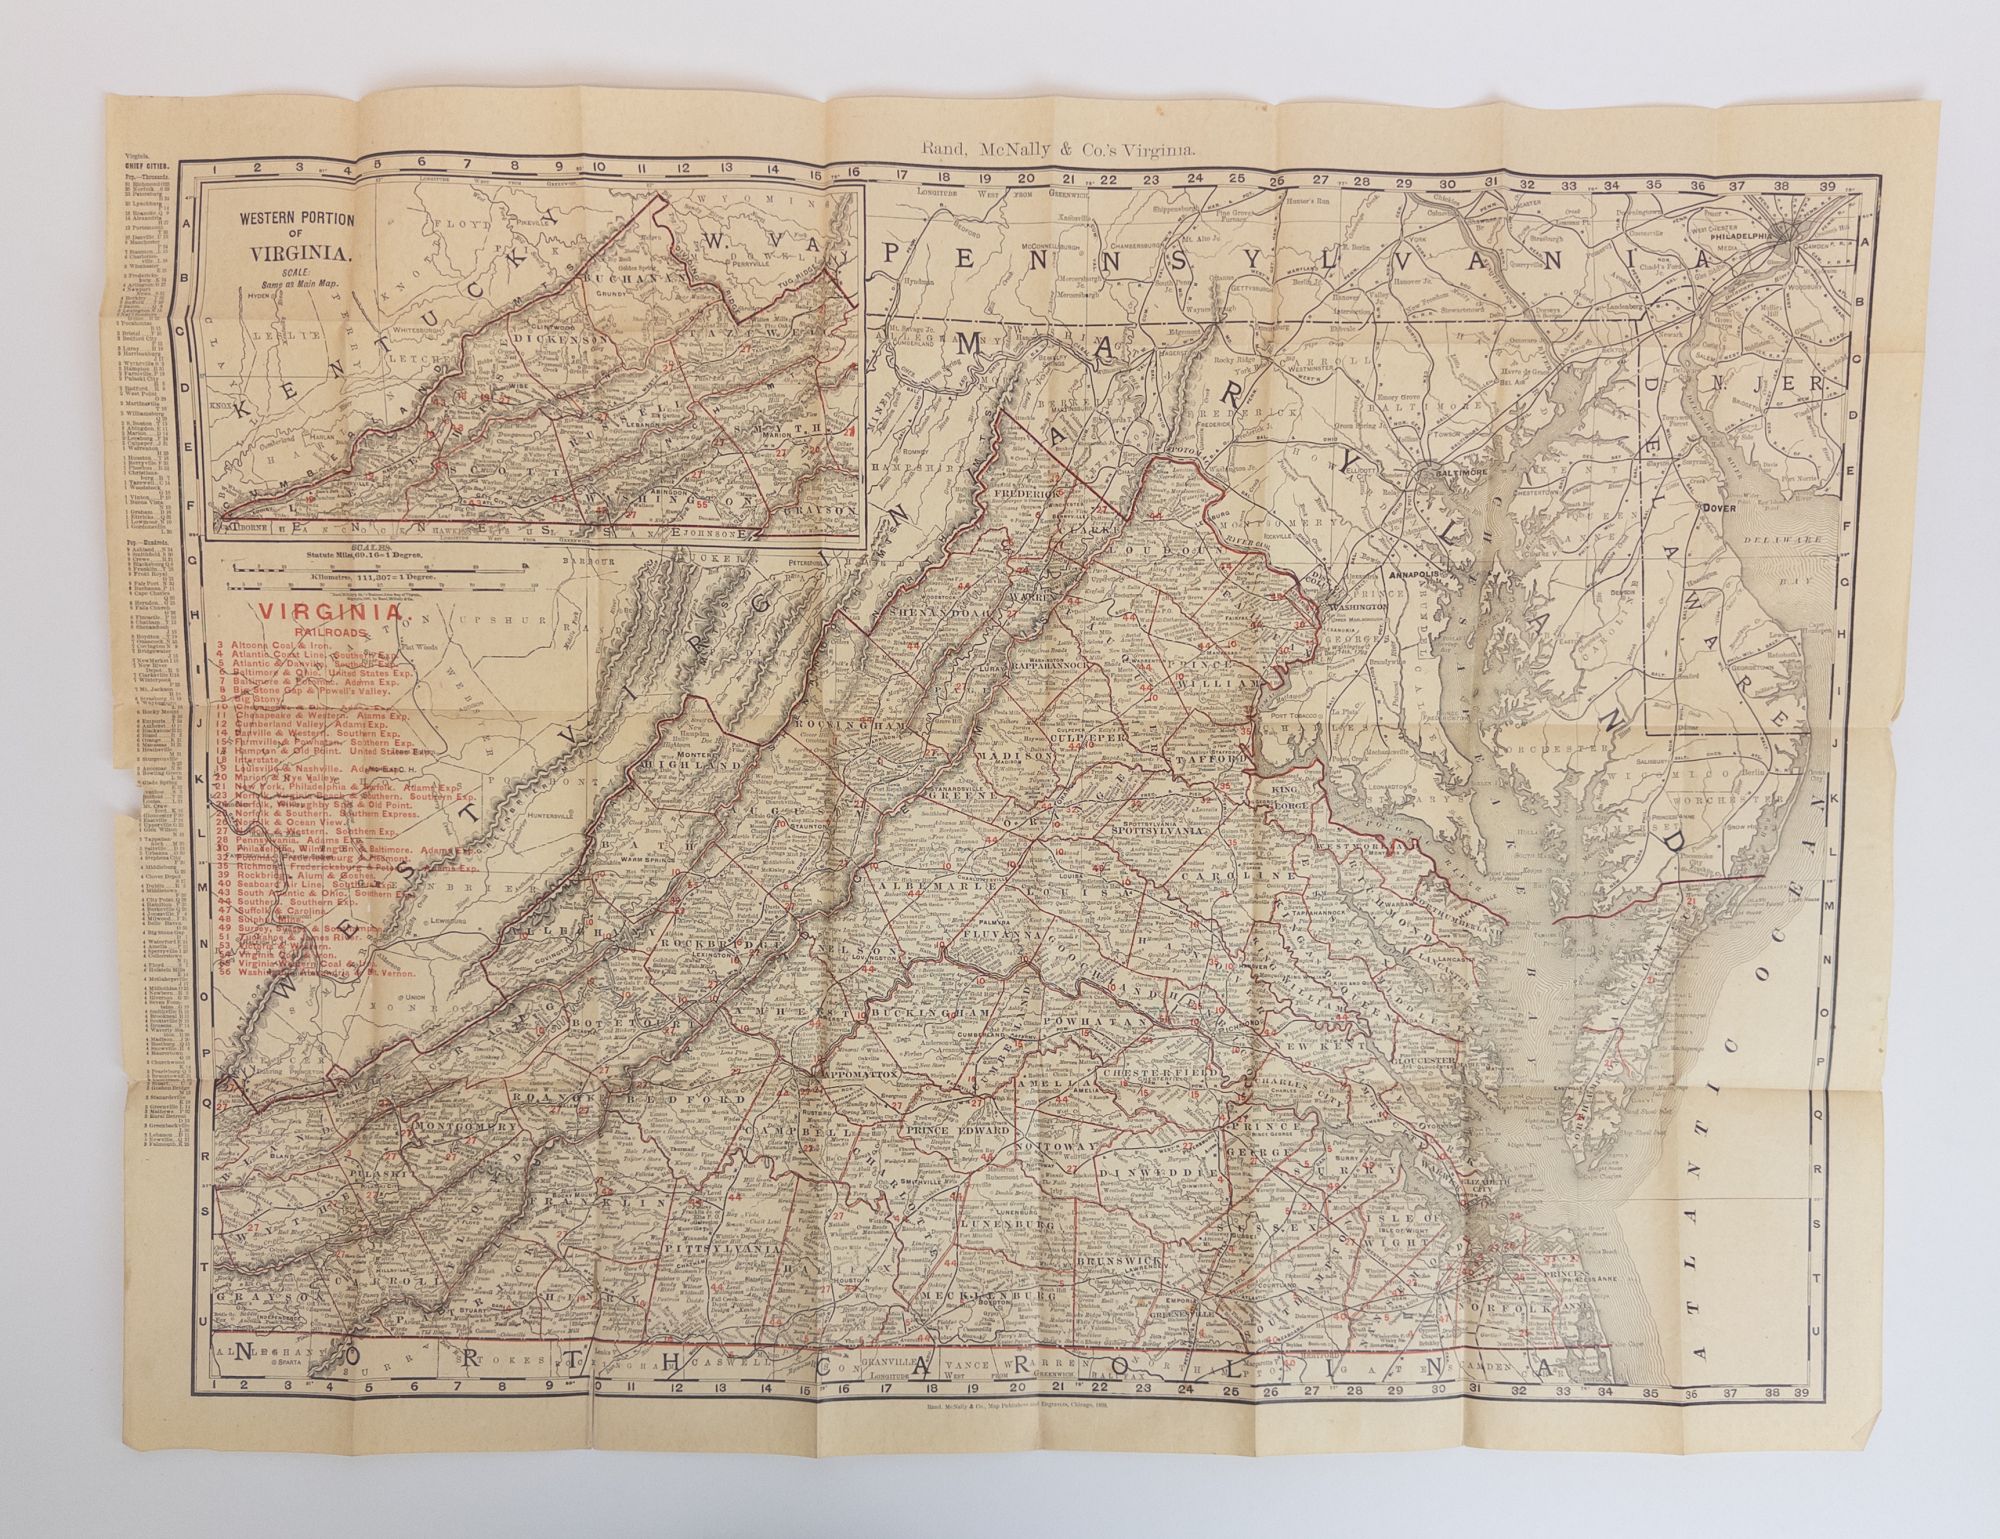 Product Image for Rand, McNally & Co.'s Indexed County and Railroad Pocket Map and Shippers' Guide of Virginia Accompanied by a New and Original Compilation and Ready Reference Index, Showing in Detail the Entire Railroad System, The Express Company Doing Business over eac